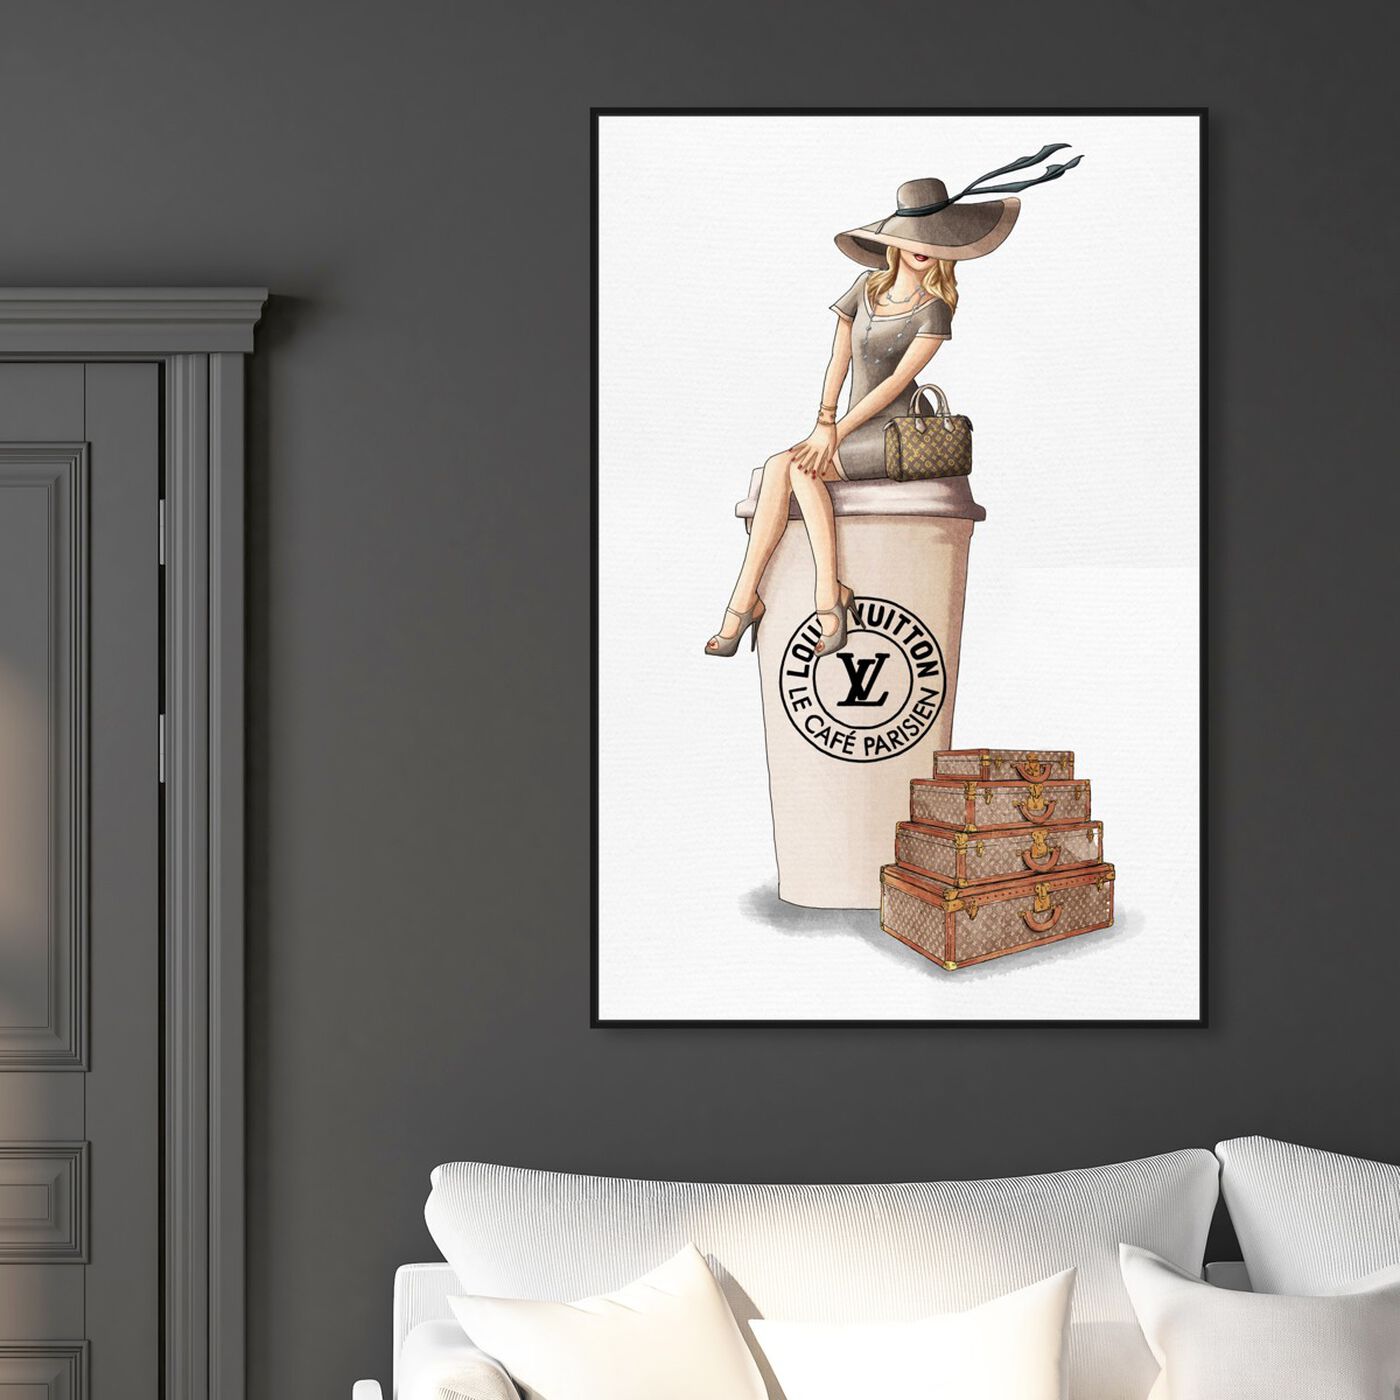 Hanging view of Cafe au Lait Paris featuring fashion and glam and handbags art.